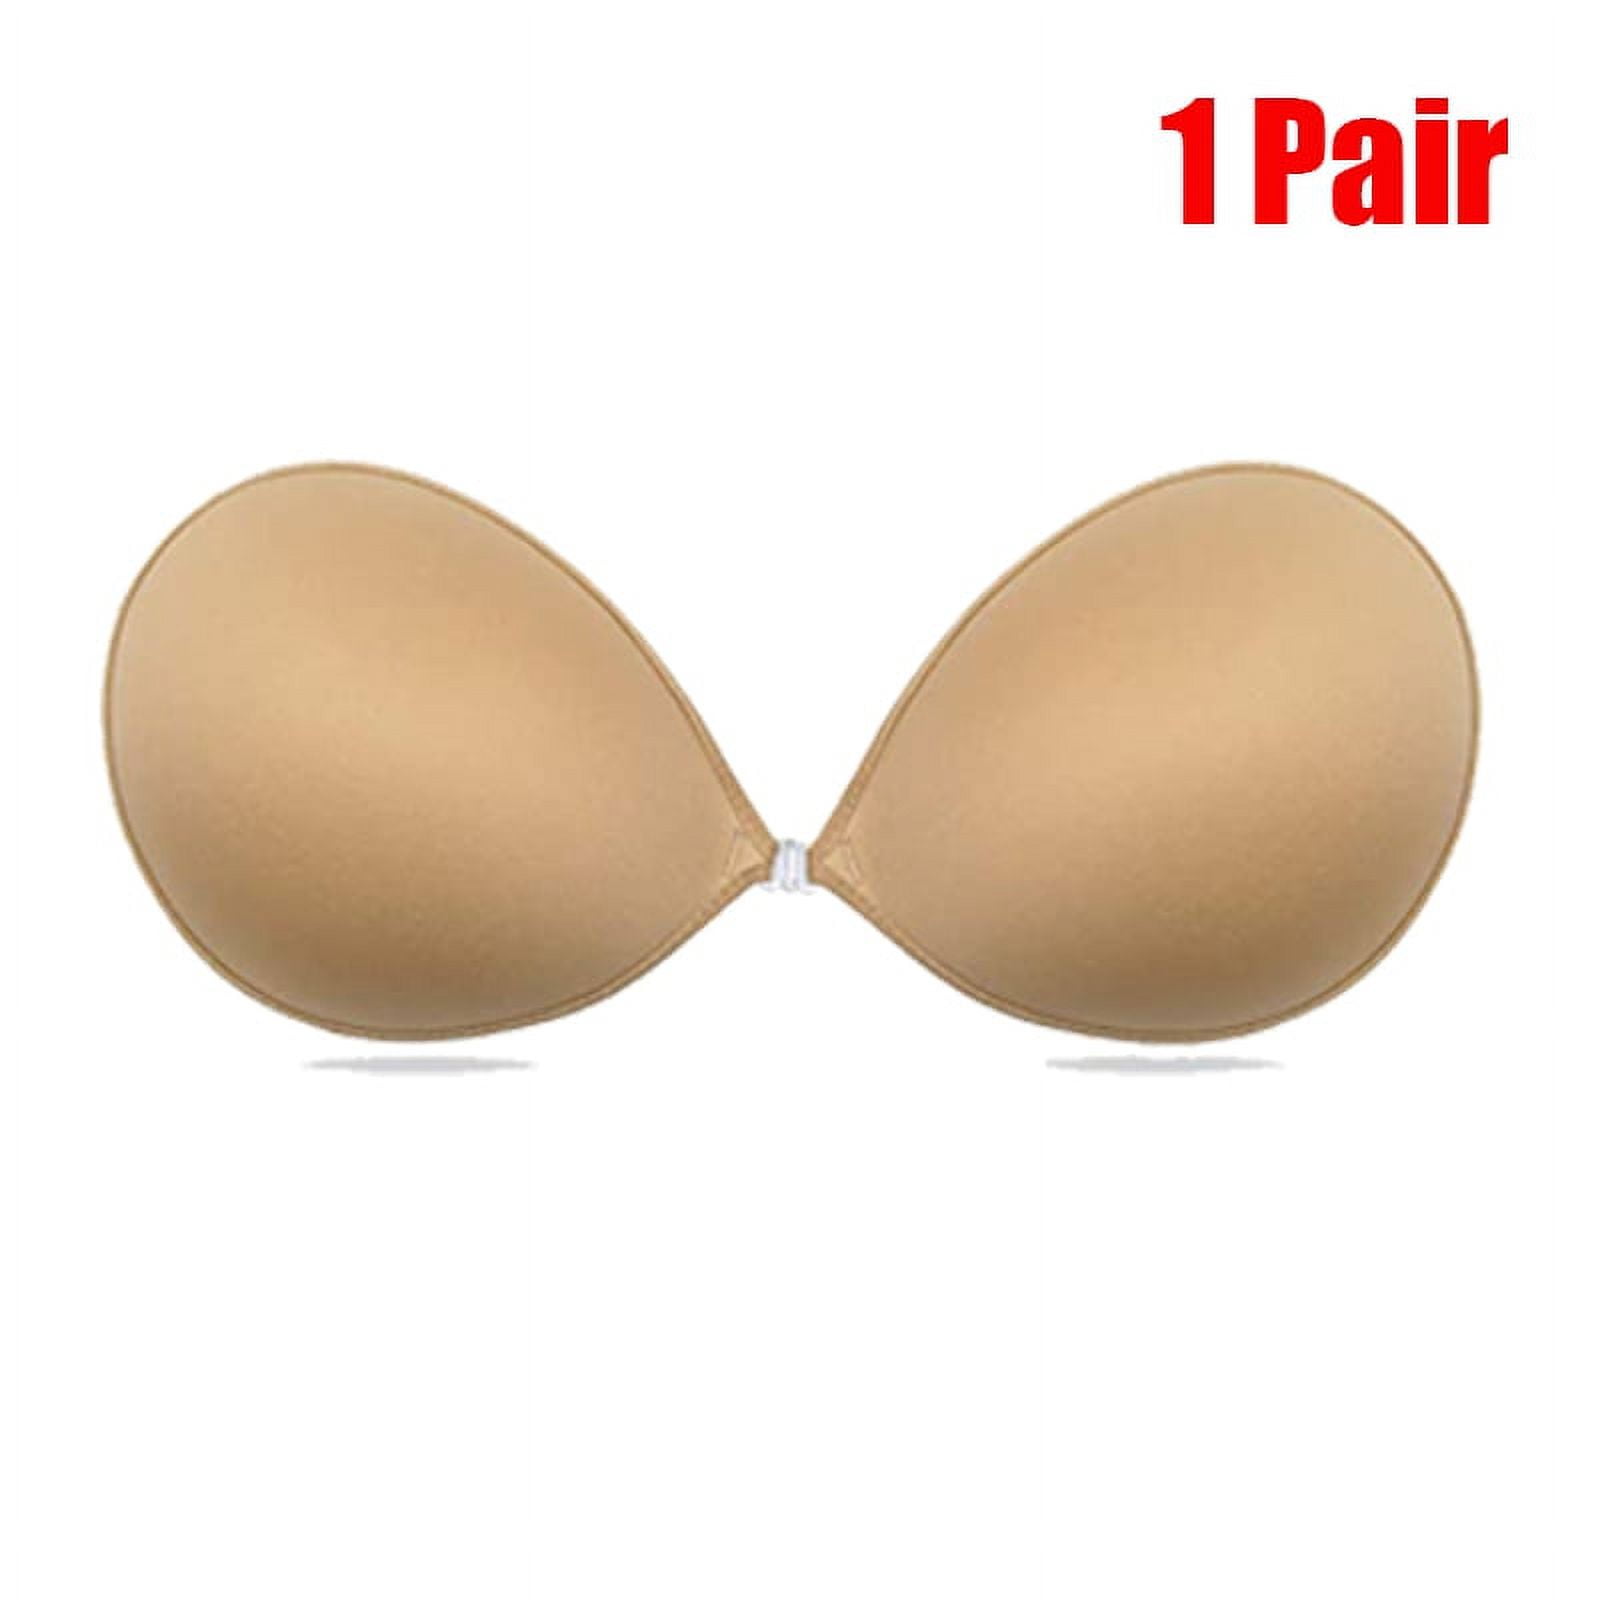 Silicone Lift Adhesive Bra, Sticky Bras for Women, Strapless Sticky Bras,  Reusable Invisilift Bra for Large Breast